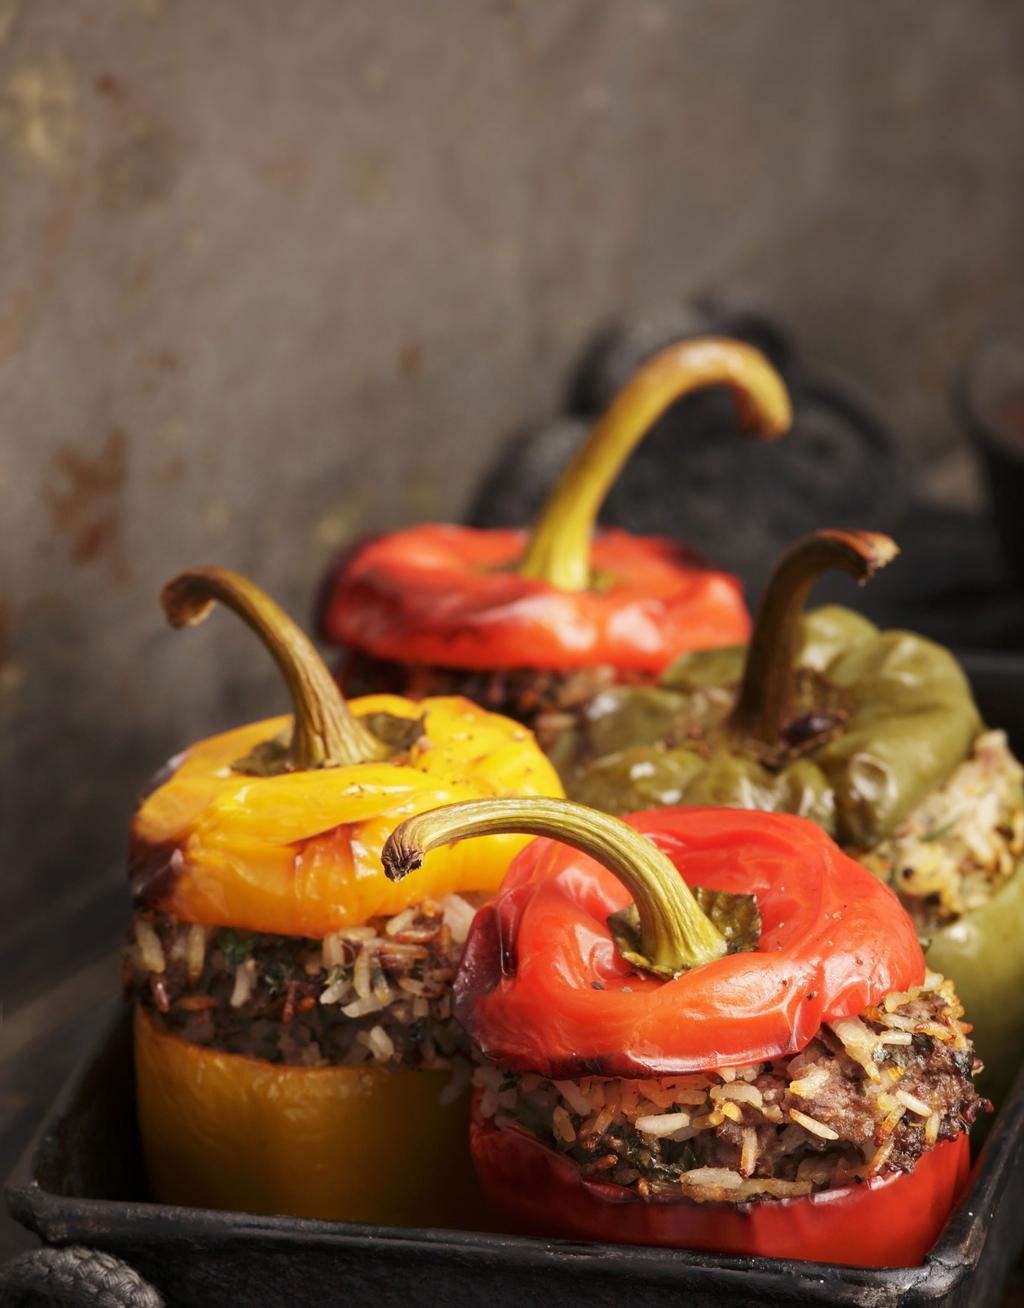 stuffed bell peppers Ingred ient s 2 medium yellow onions 2 tbsp. extra-virgin olive oil 28 oz canned tomatoes, drained 2 tbsp. fresh mint ¾ tsp. kosher salt, plus extra ¼ tsp.